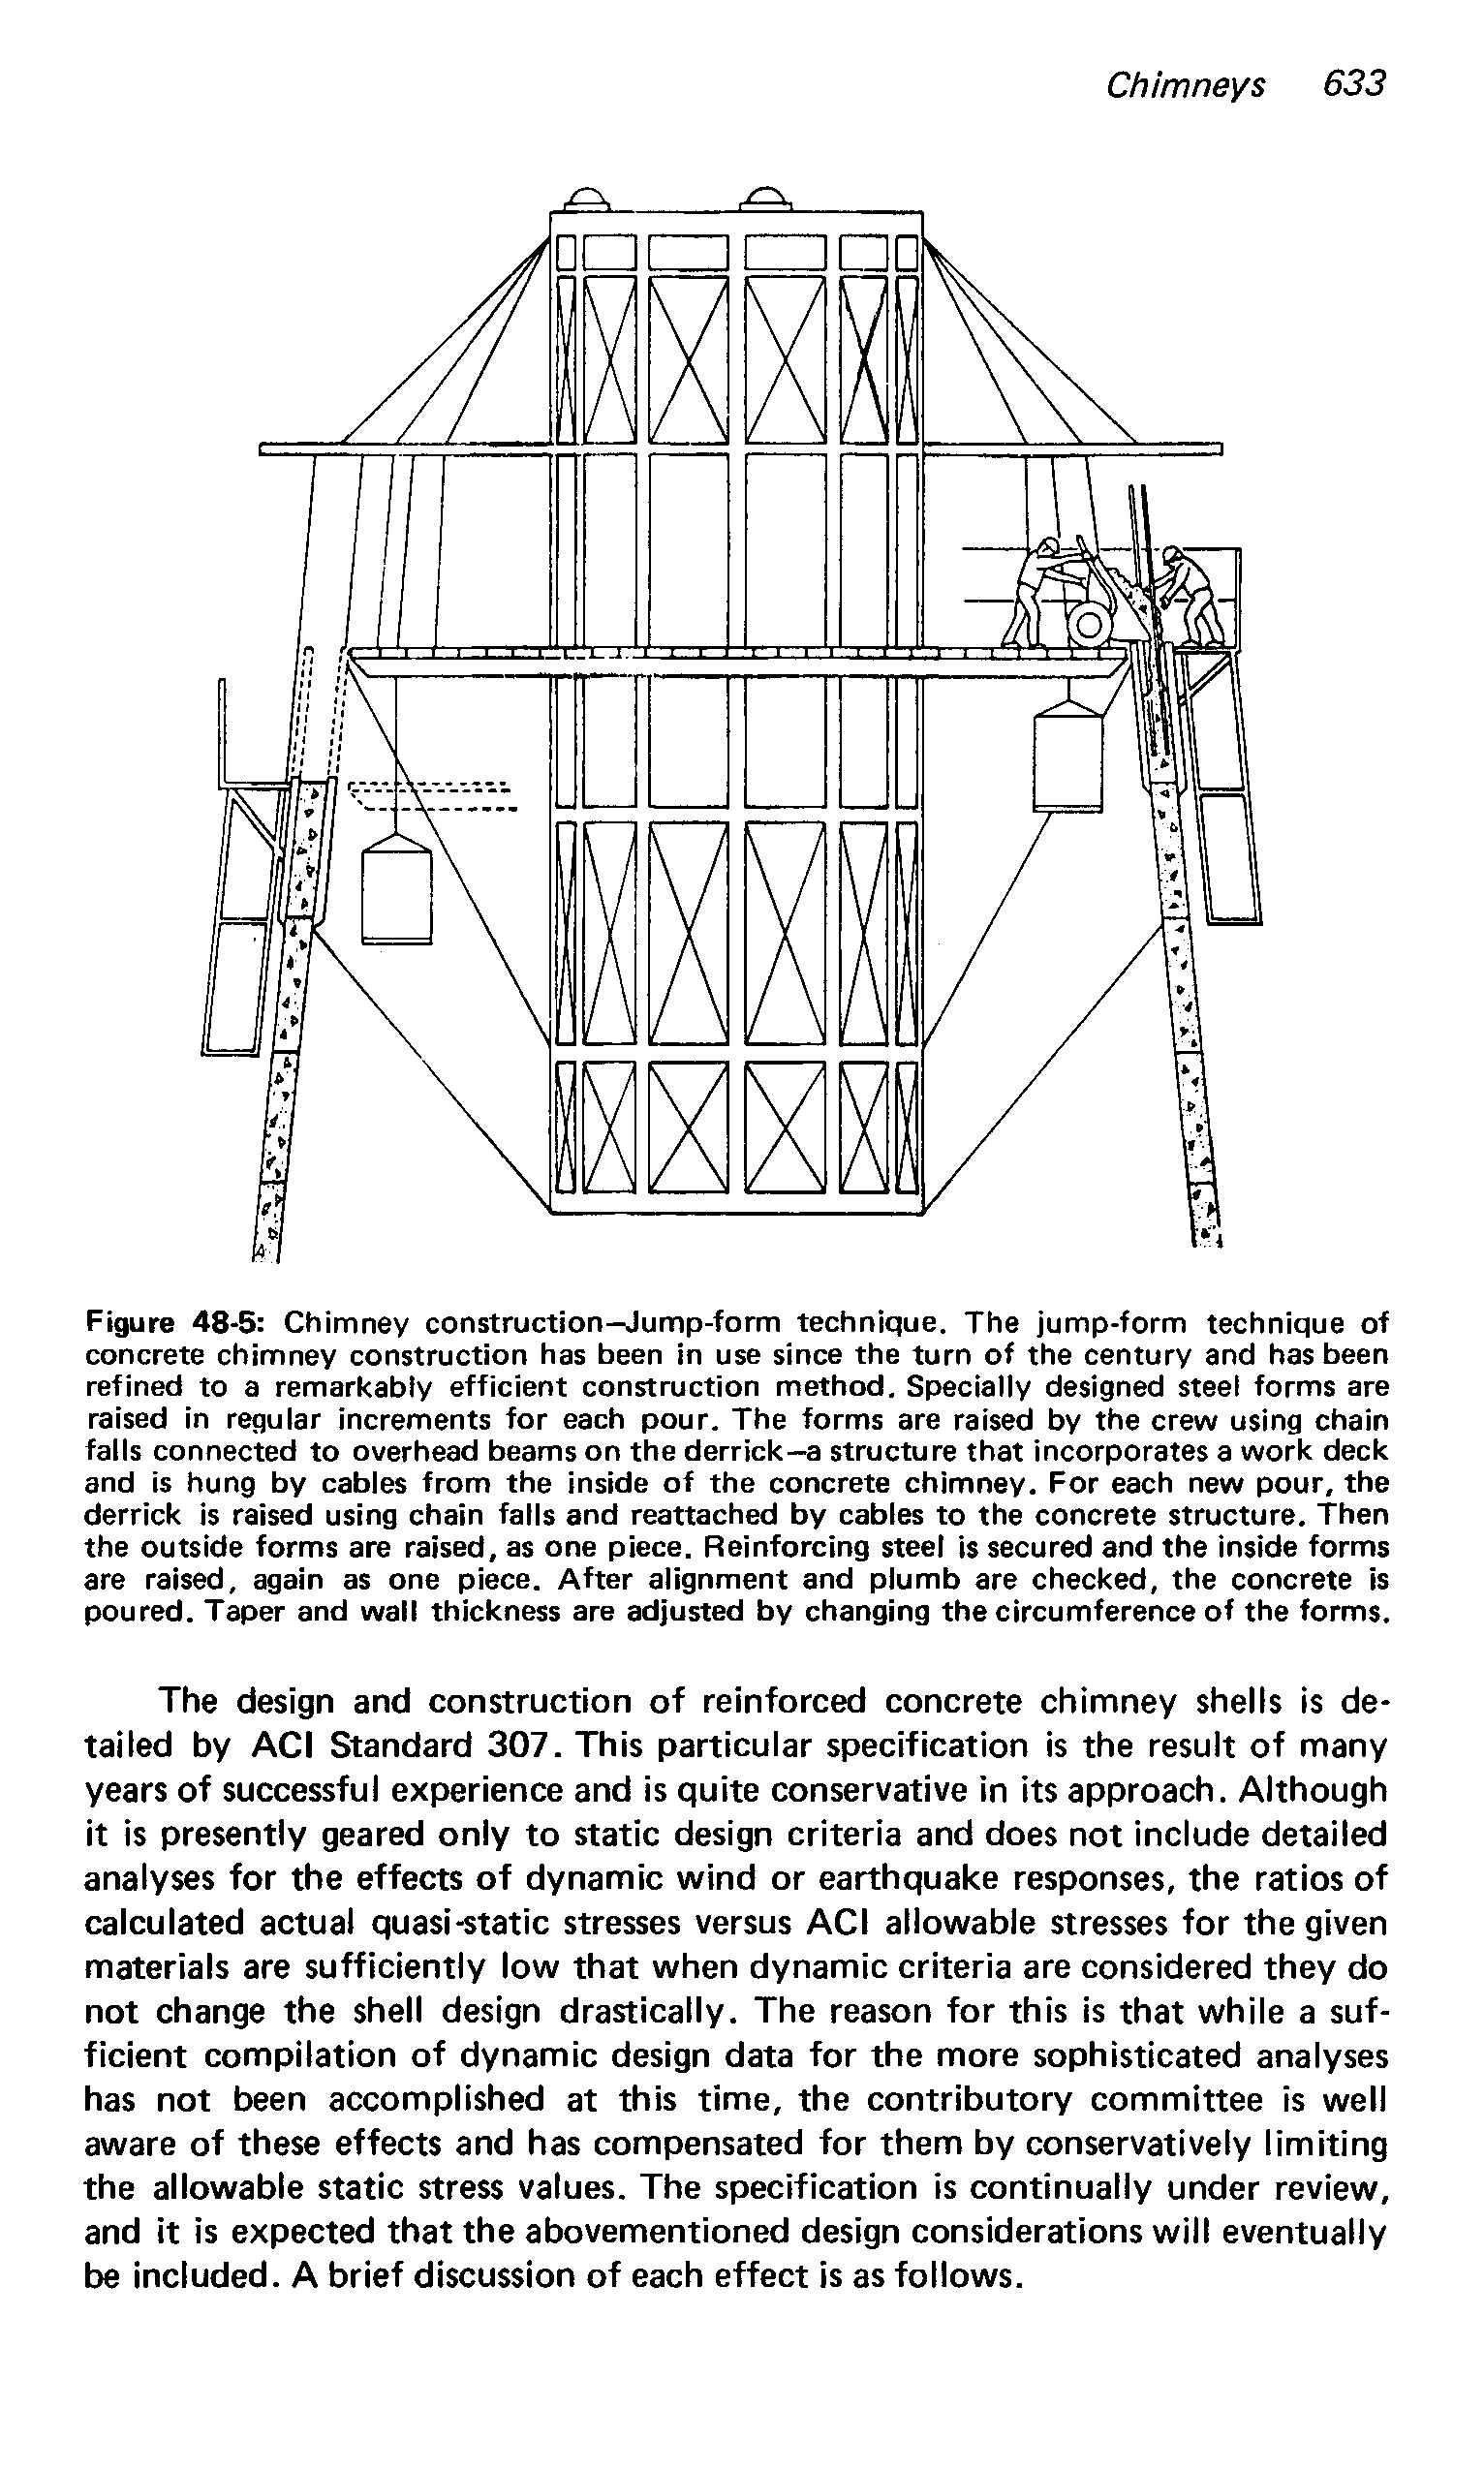 Figure 48-5 Chimney construction-Jump-form technique. The jump-form technique of concrete chimney construction has been in use since the turn of the century and has been refined to a remarkably efficient construction method. Specially designed steel forms are raised in regular increments for each pour. The forms are raised by the crew using chain falls connected to overhead beams on the derrick—a structure that incorporates a work deck and is hung by cables from the inside of the concrete chimney. For each new pour, the derrick is raised using chain falls and reattached by cables to the concrete structure. Then the outside forms are raised, as one piece. Reinforcing steel is secured and the Inside forms are raised, again as one piece. After alignment and plumb are checked, the concrete is poured. Taper and wall thickness are adjusted by changing the circumference of the forms.